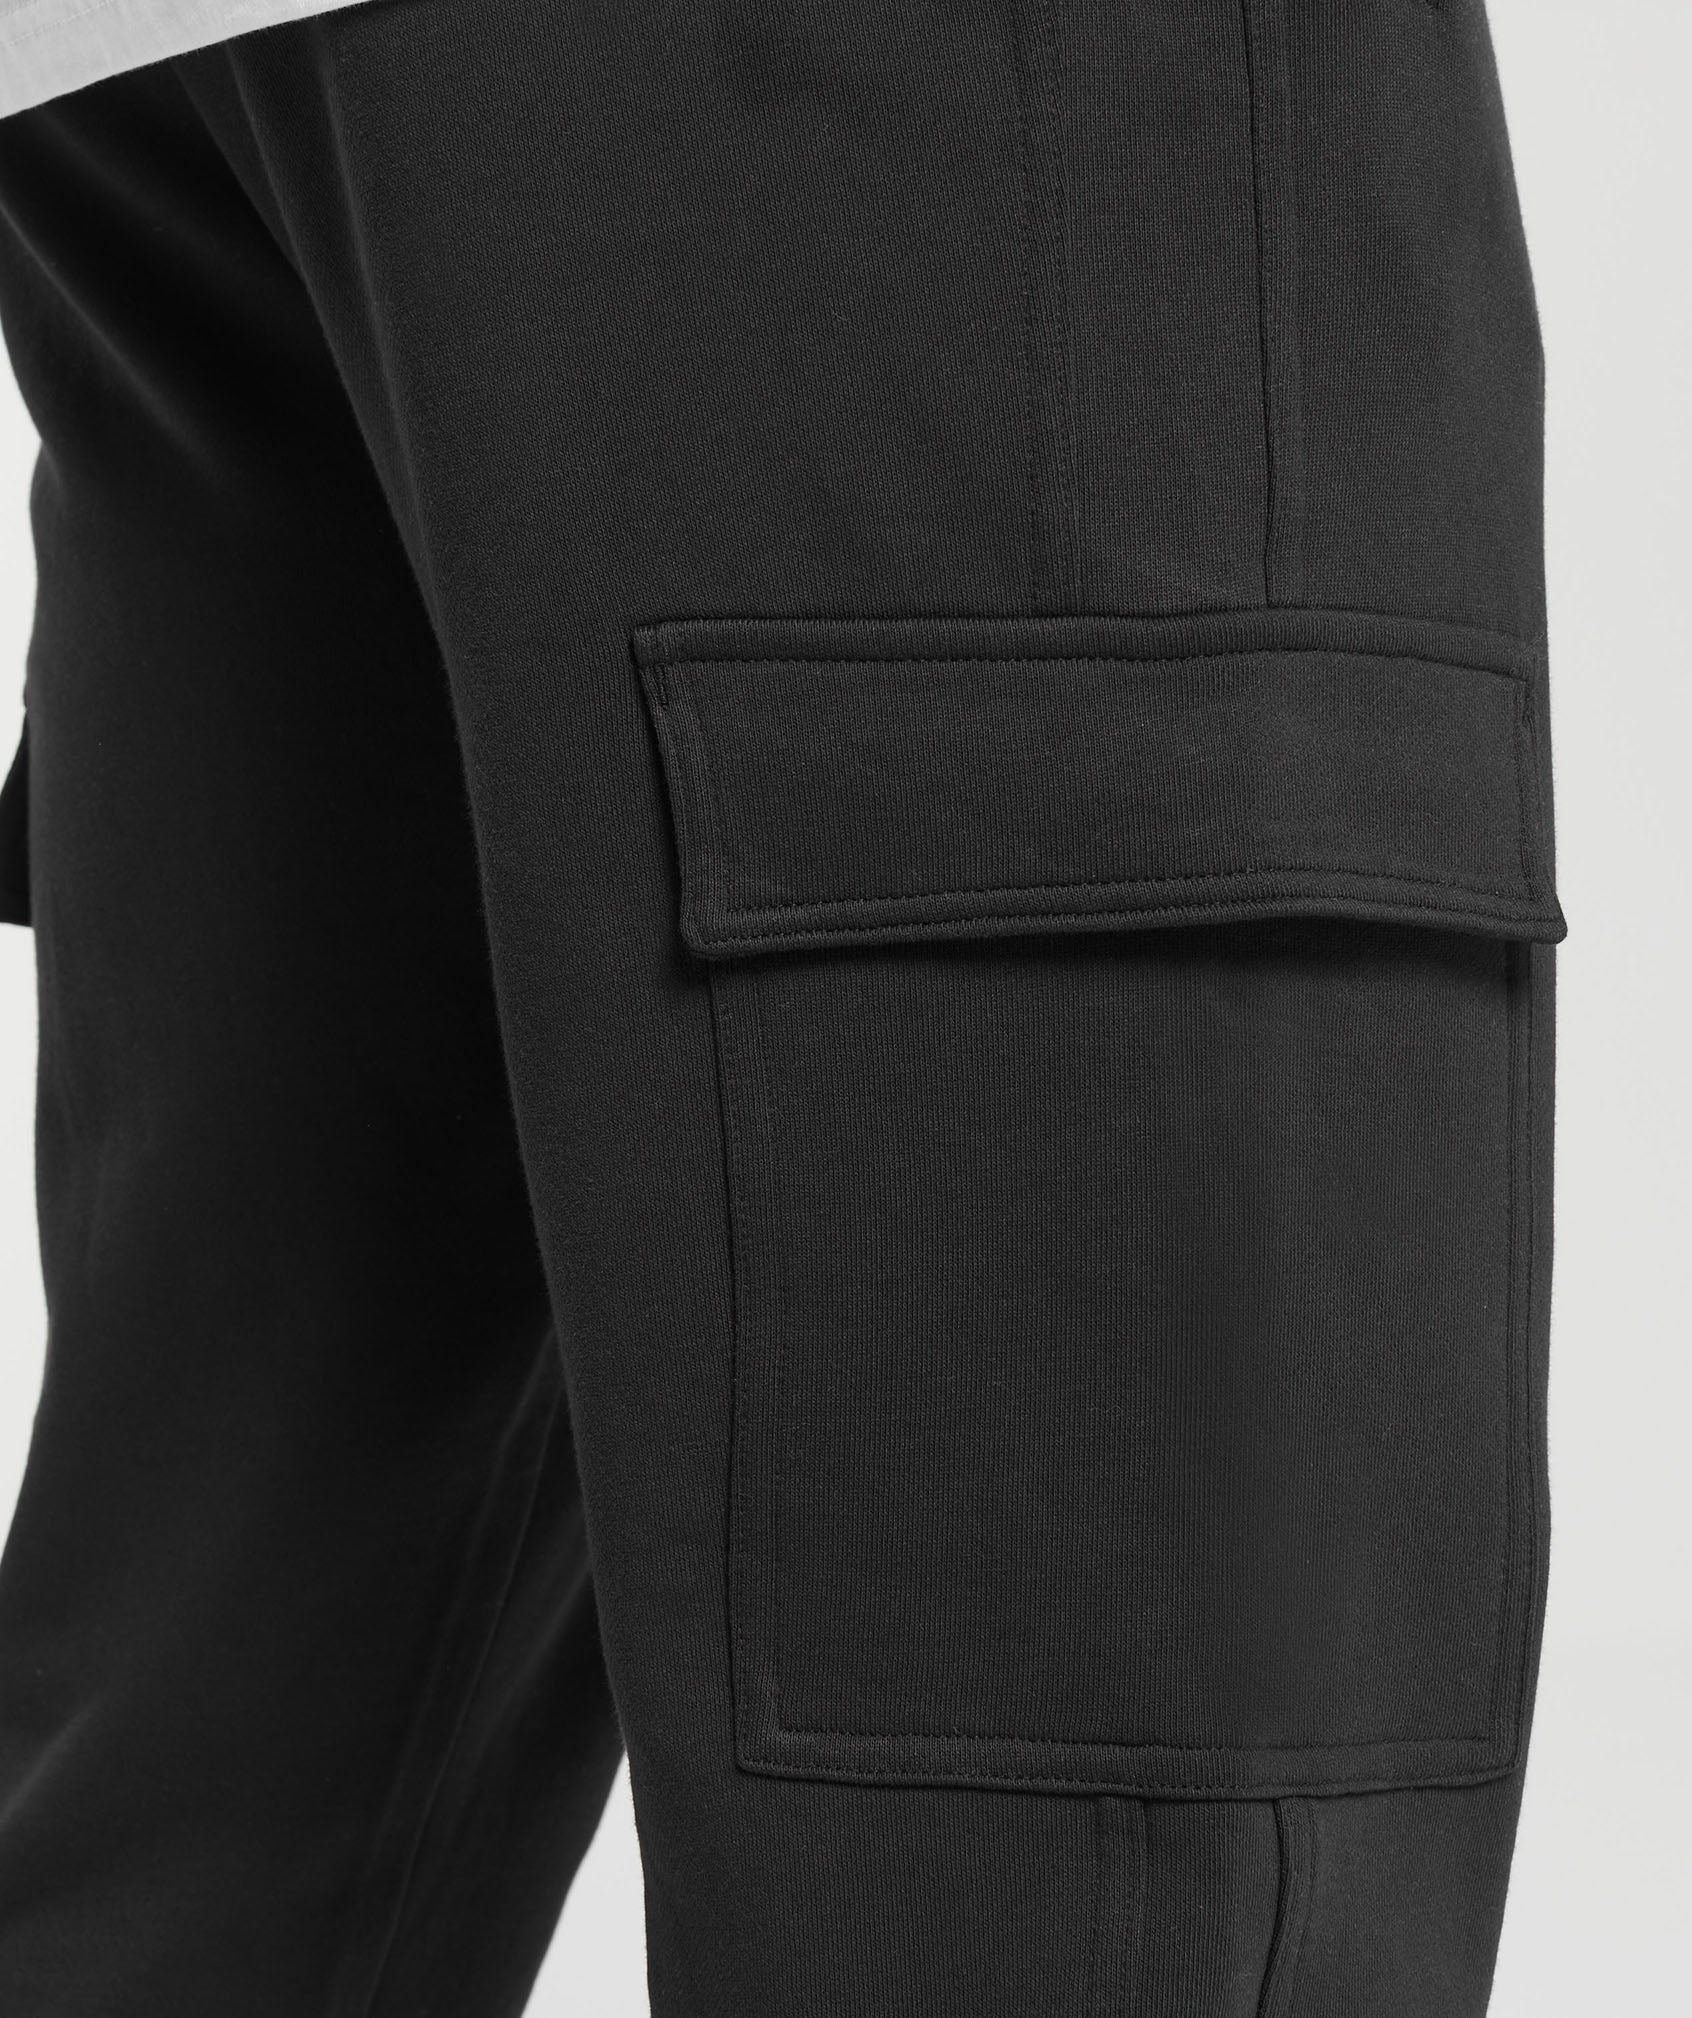 Rest Day Essentials Cargo Joggers in Black - view 6